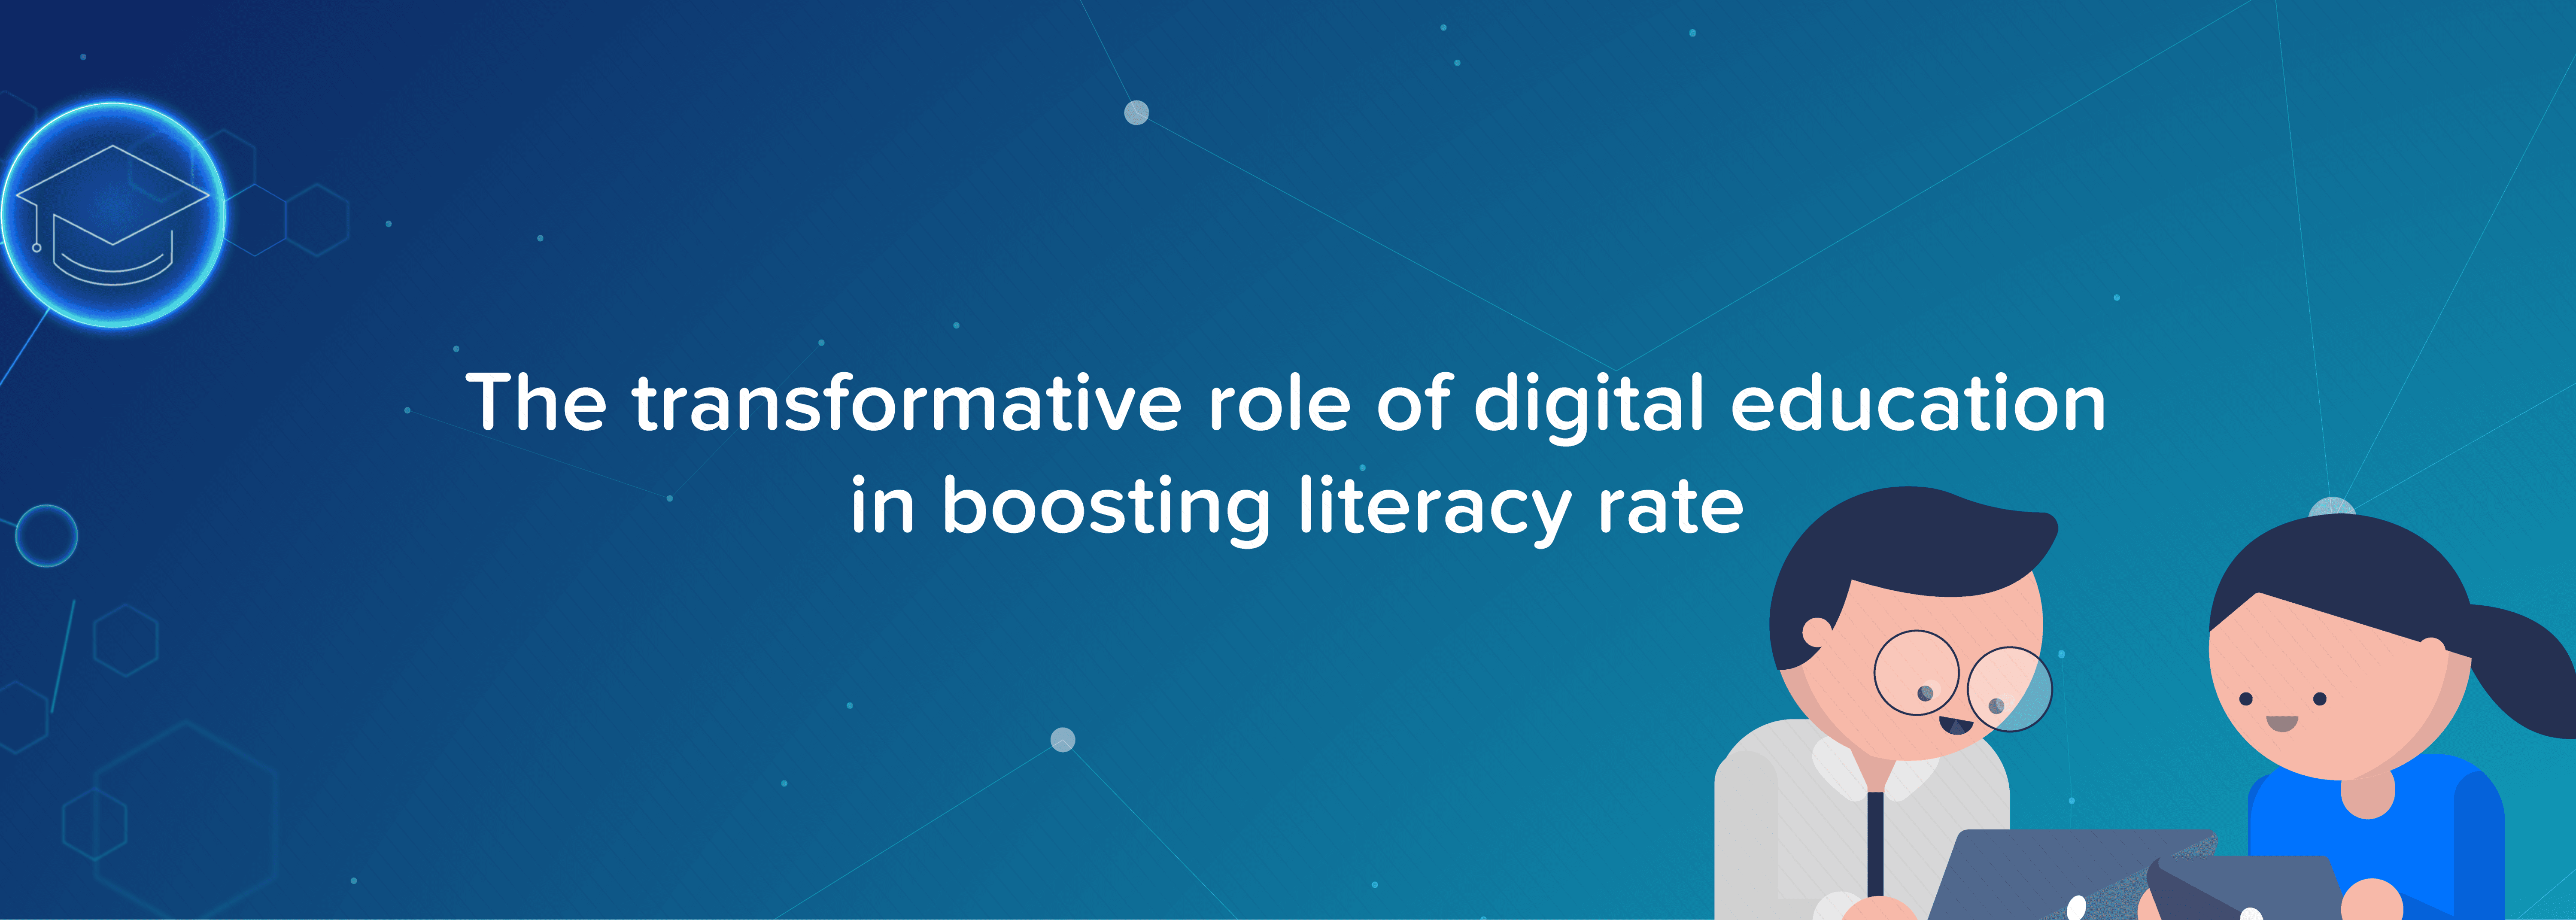 The Transformative Role of Digital Education in Boosting Literacy Rate